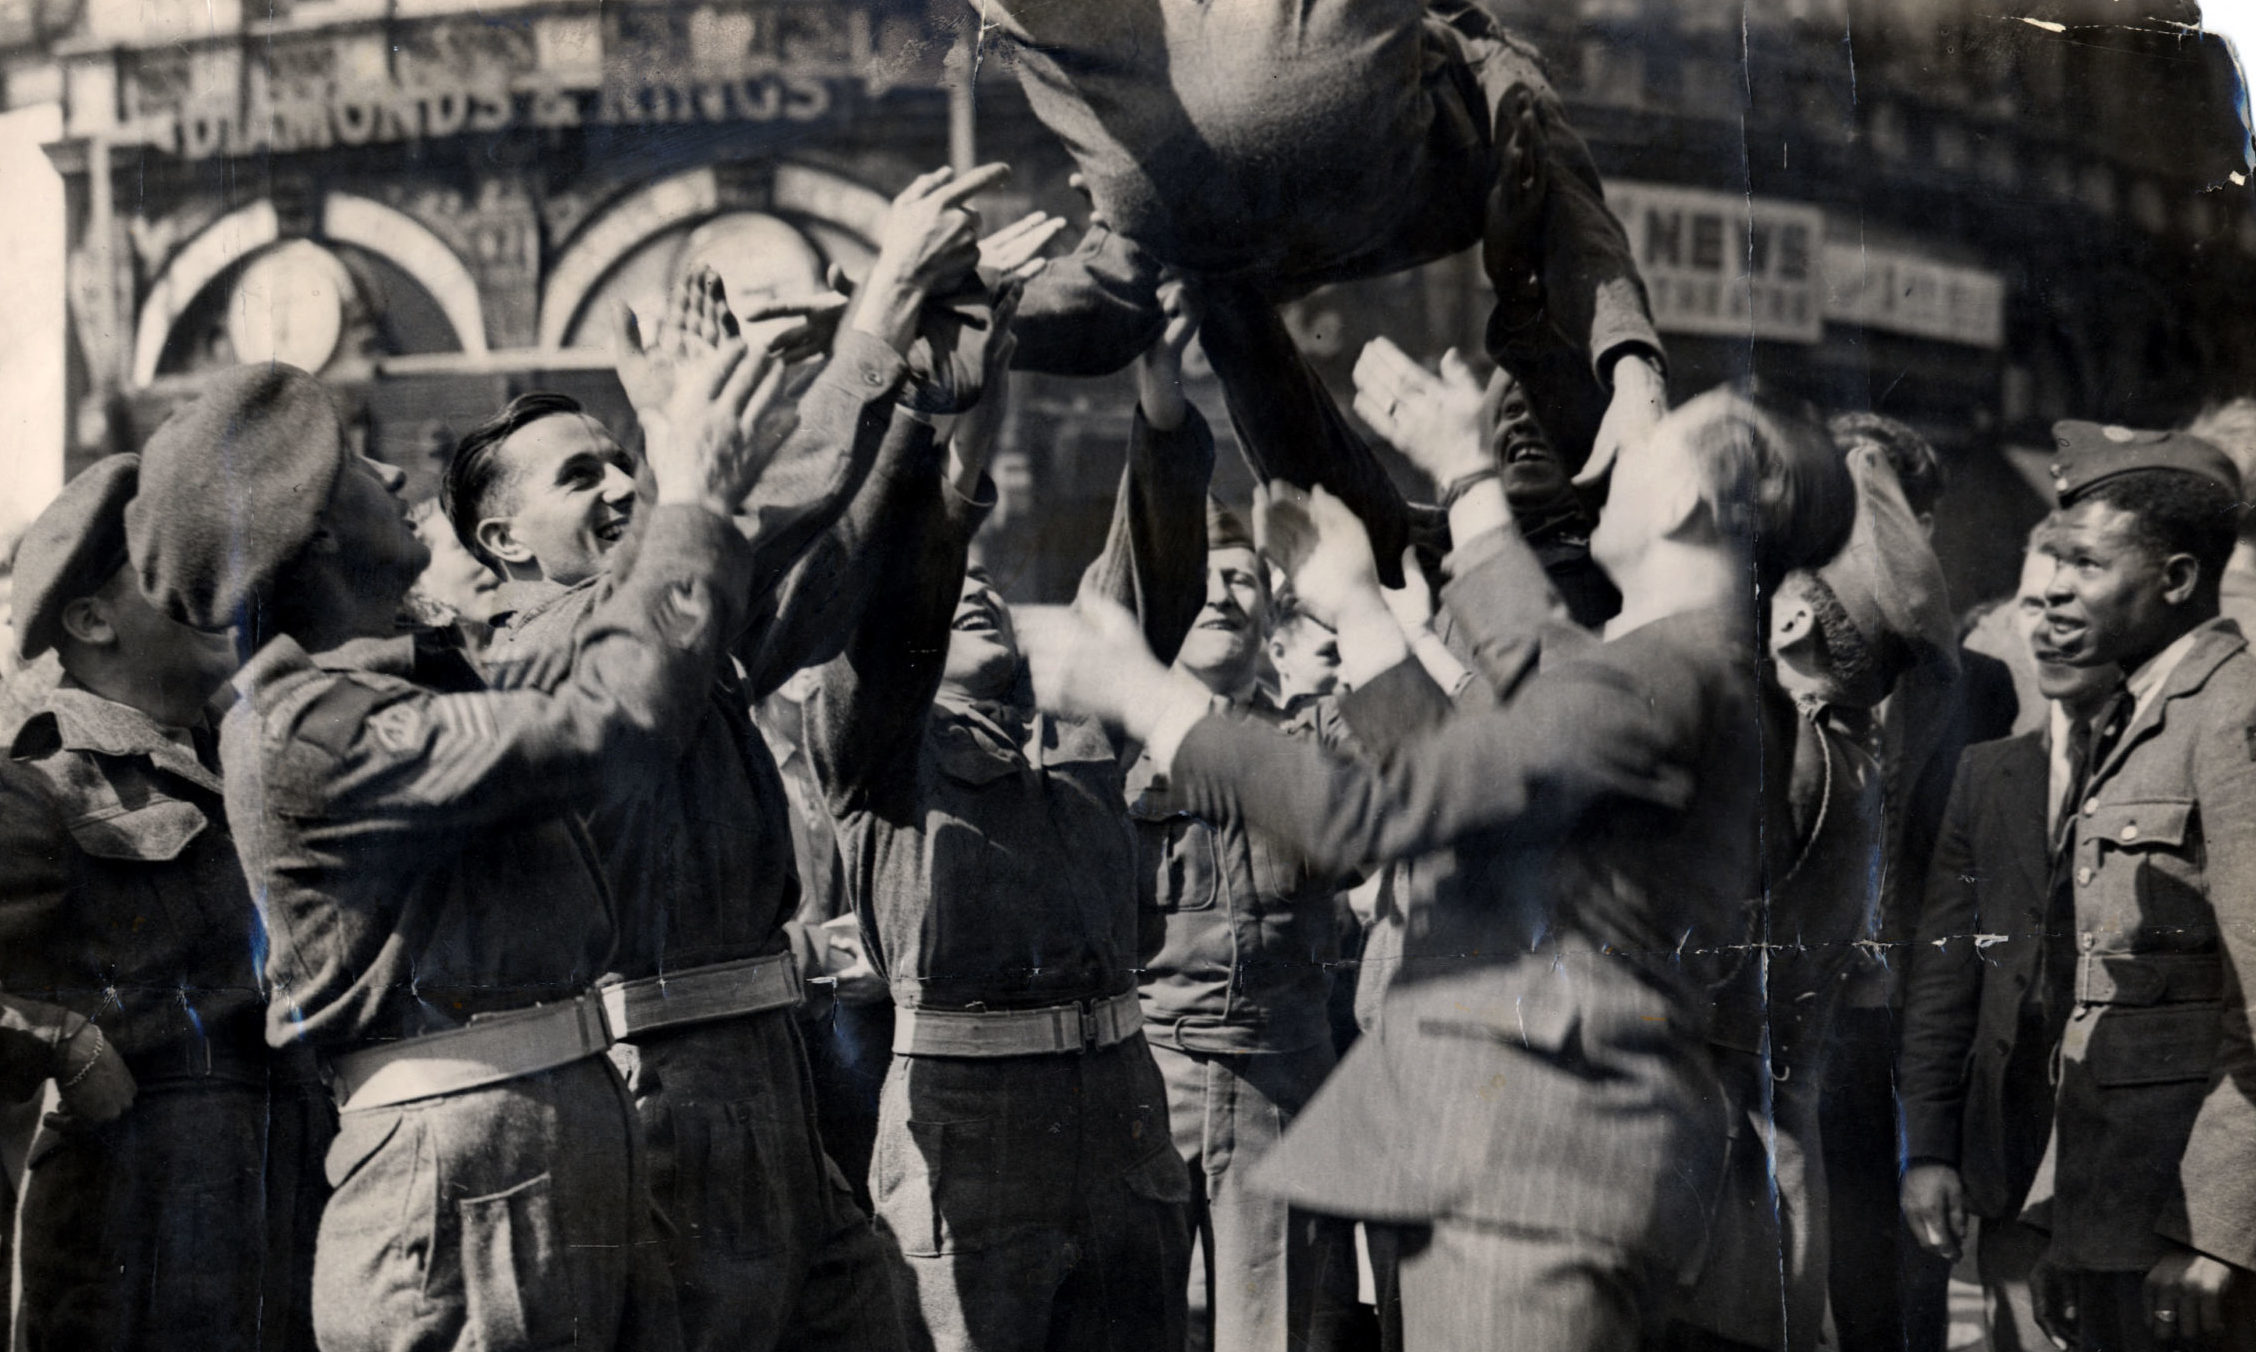 Soldiers celebrating Victory over Japan in Piccadilly Circus, London.